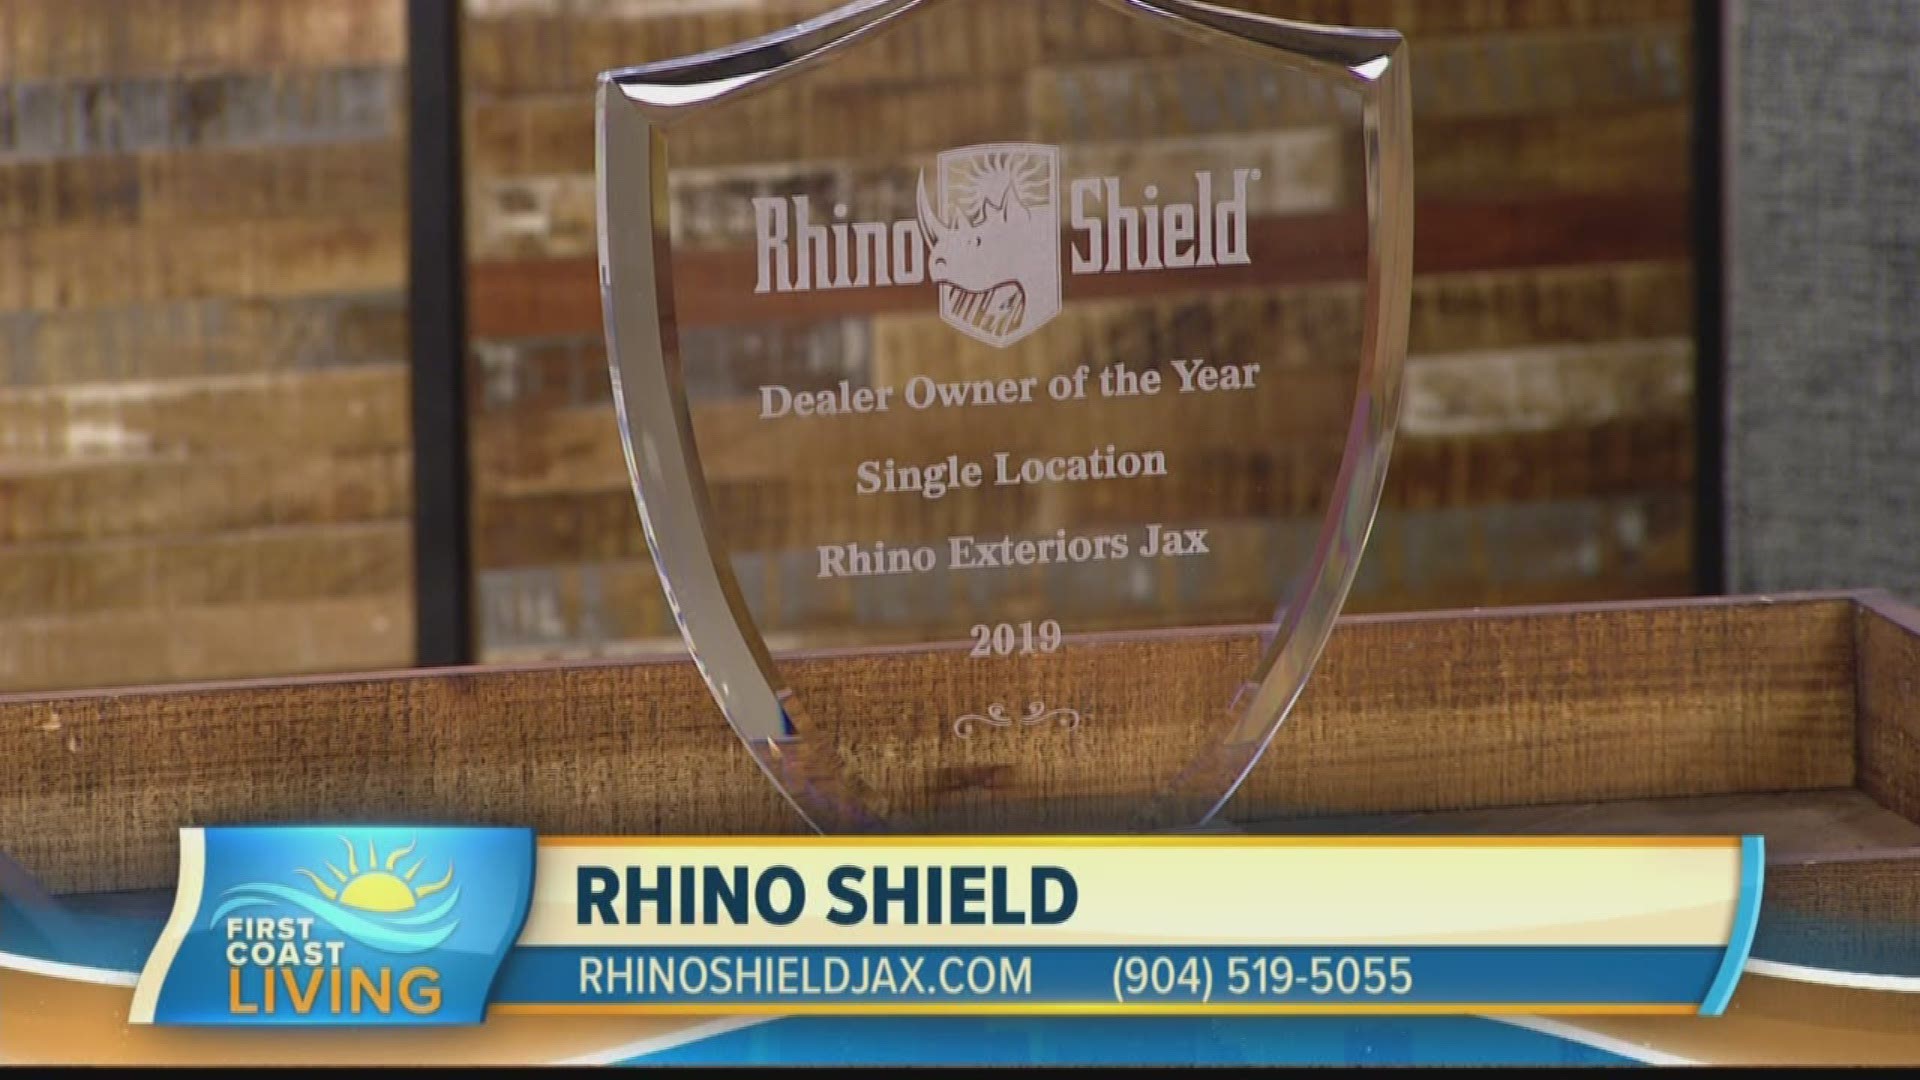 Rhino Shield is celebrating its 20th year in business this year.